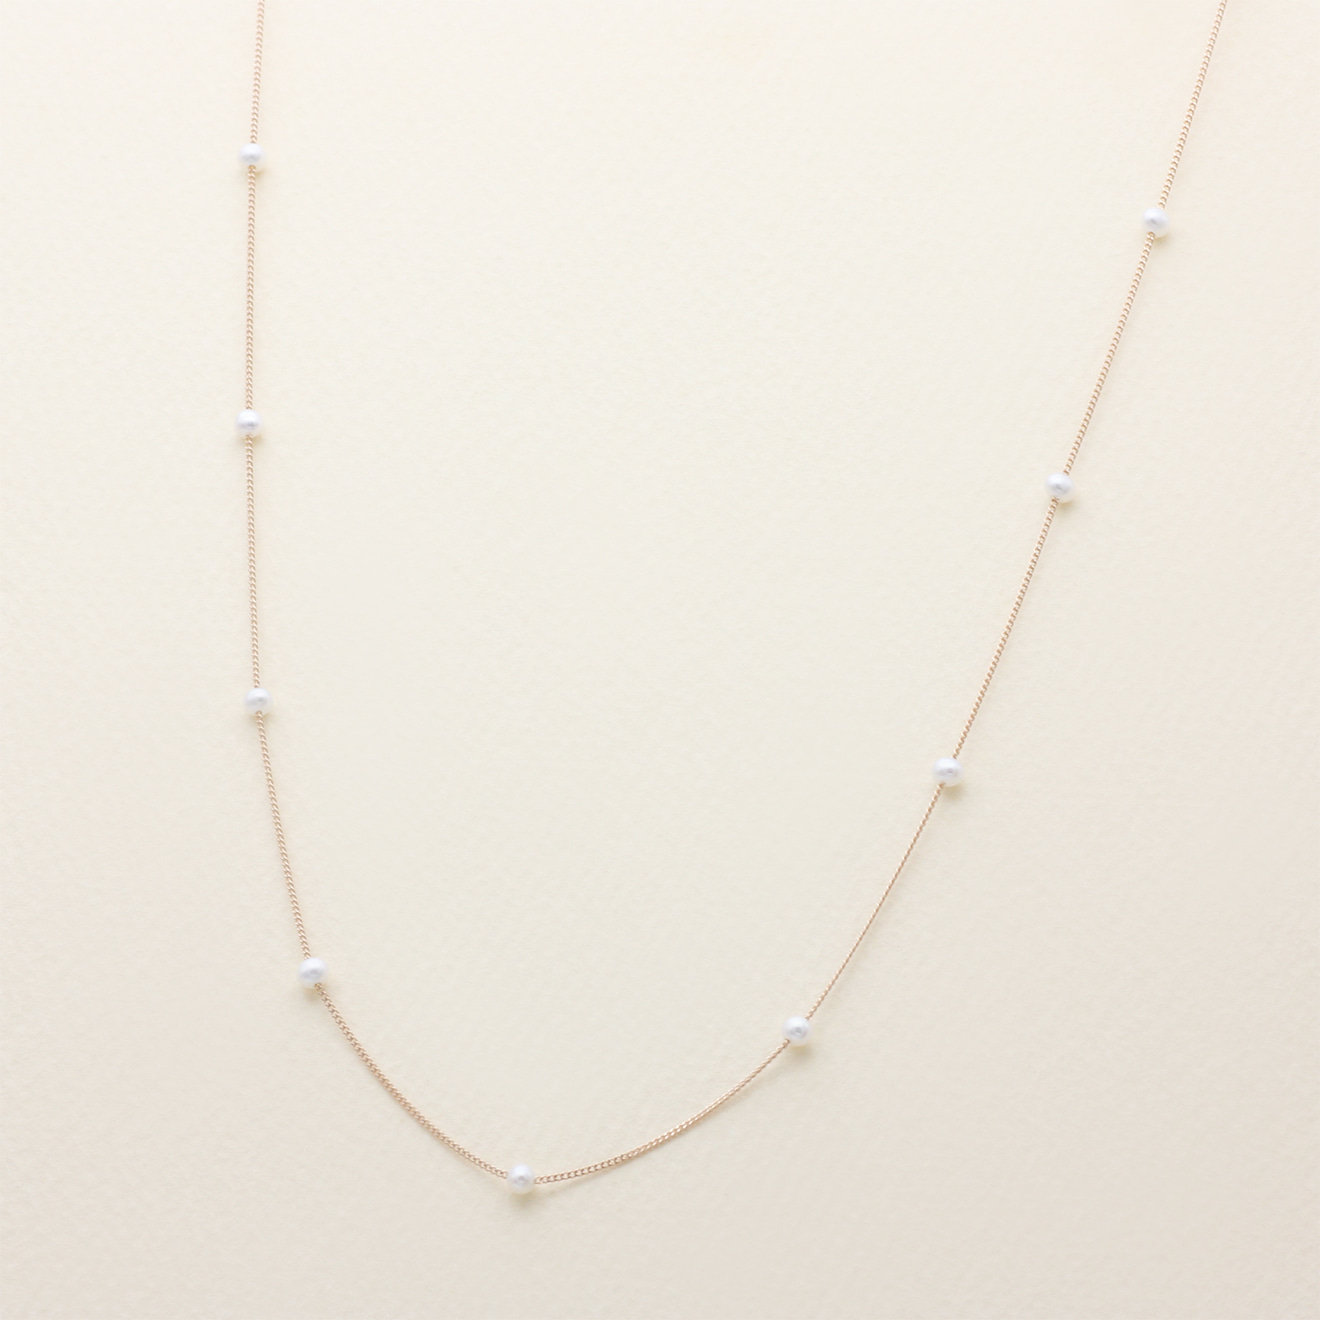 Linked Medium Pearl Necklace